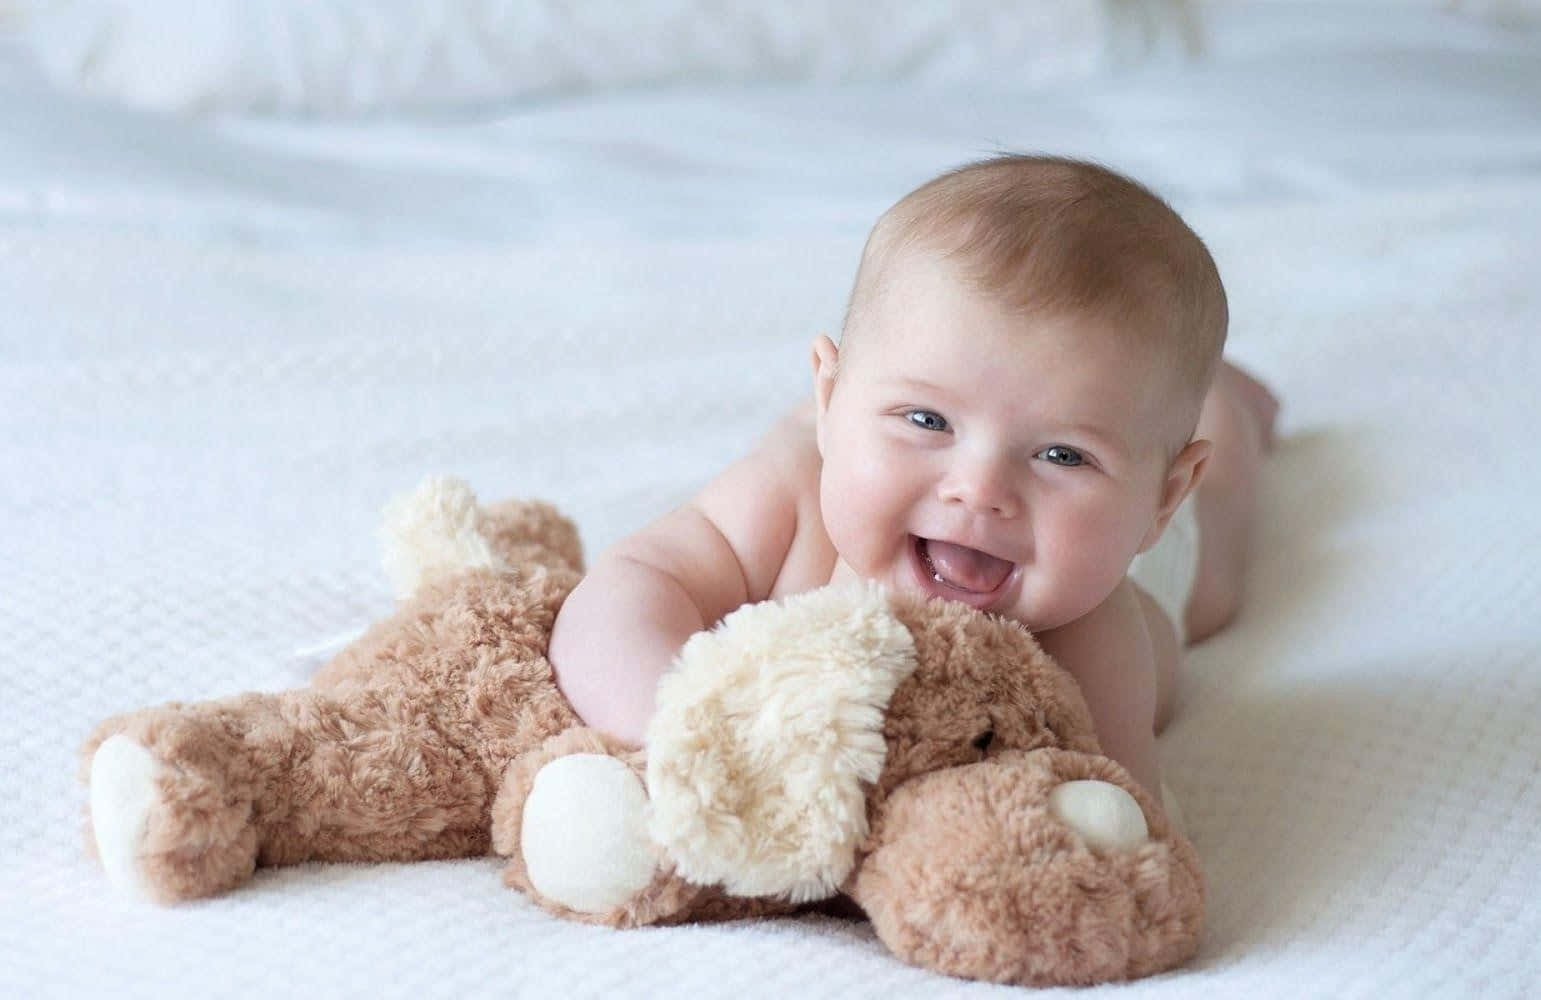 cute baby child wallpapers